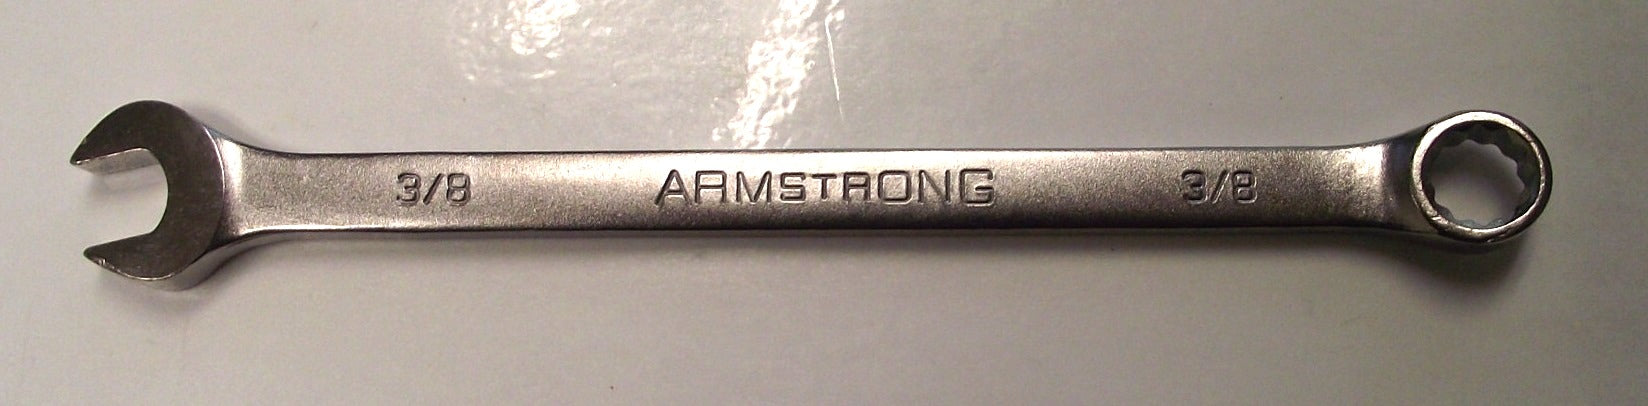 Armstrong 25-462 3/8" Combination Wrench 12 Point USA